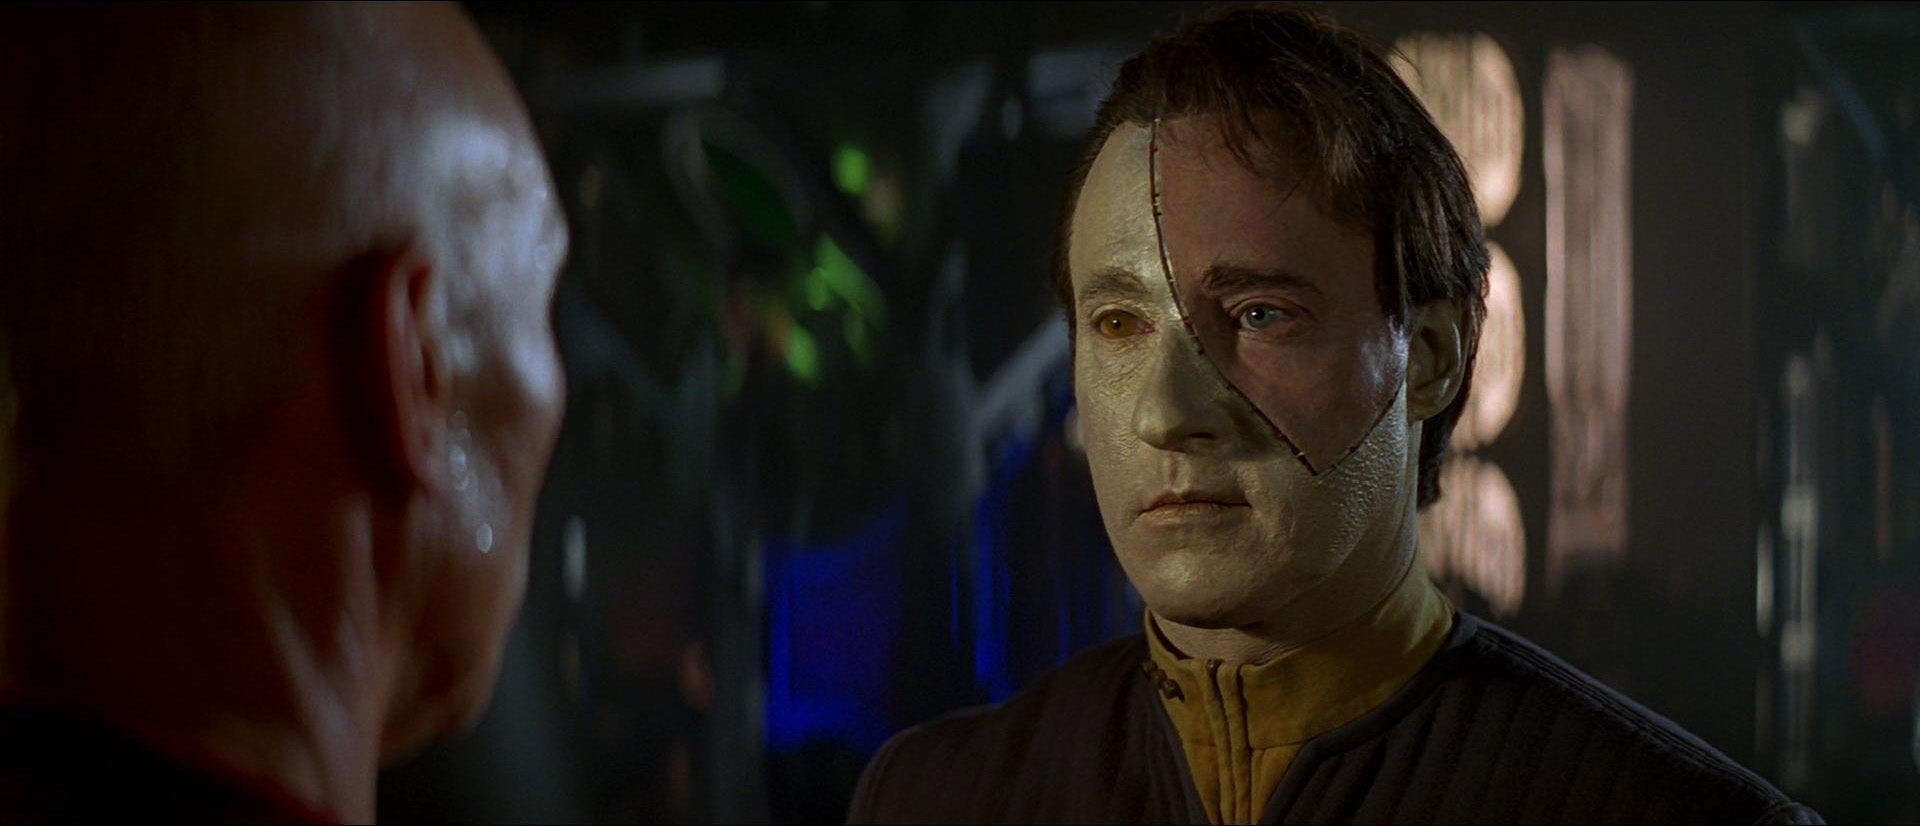 Jean-Luc Picard stands face-to-face with Data who was tempted by the Borg Queen's offer of human skin in Star Trek: First Contact